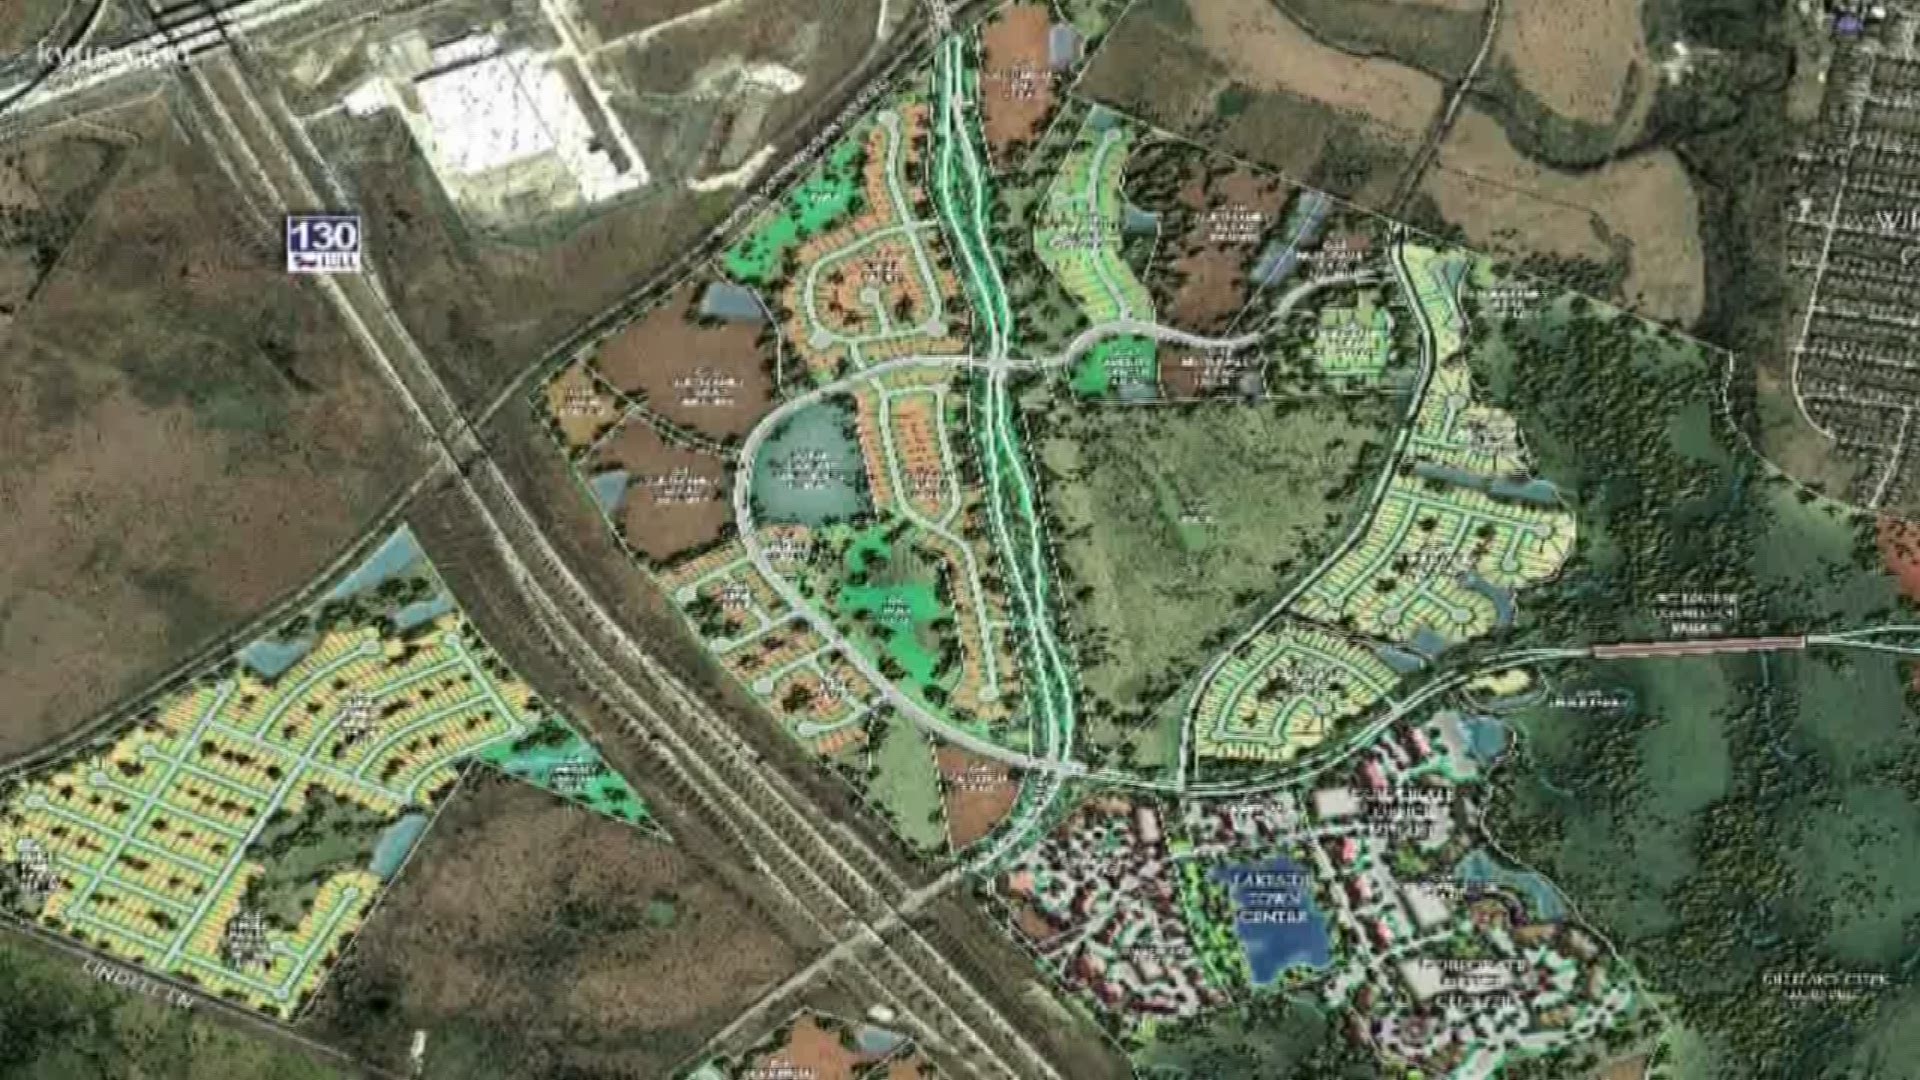 A big new development is coming to east Travis County near Manor. Wildhorse sits on approximately 1,400 acres of land at the intersection of 290 and Highway 130.